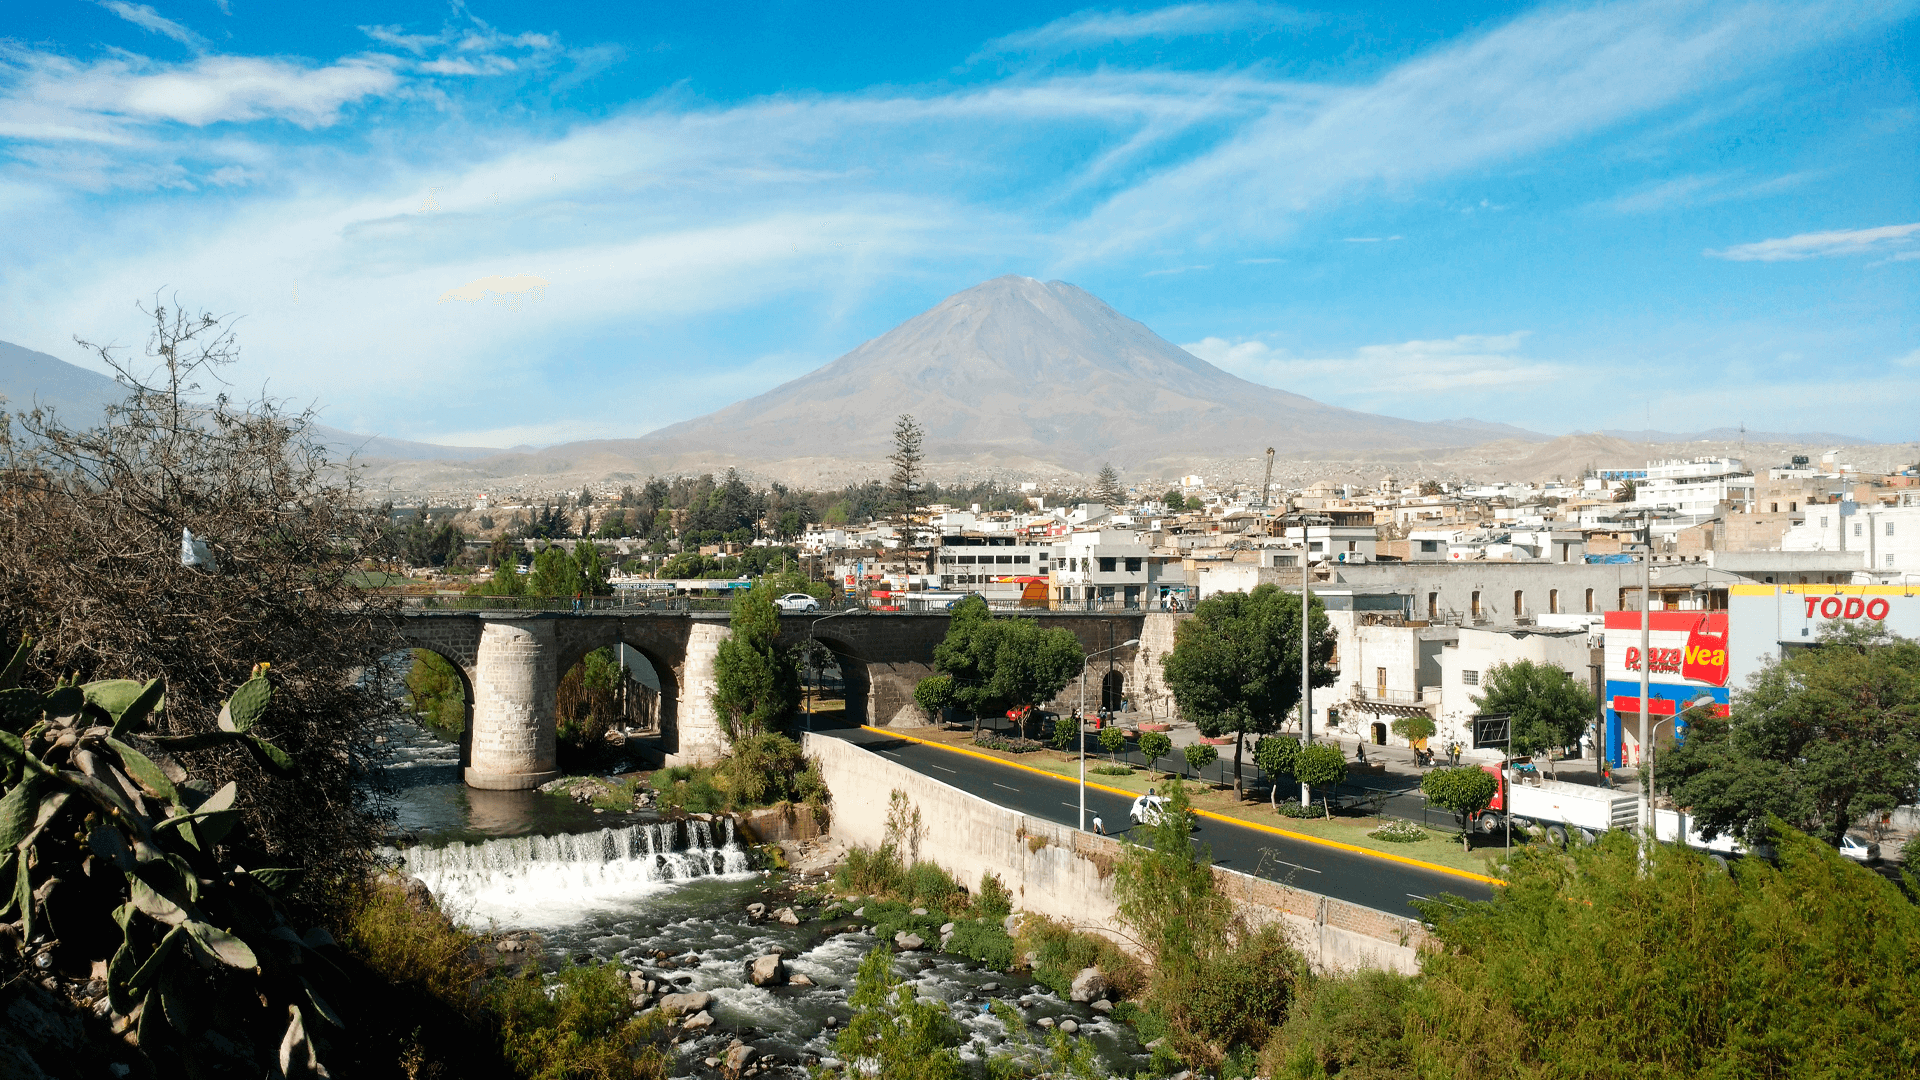 Arequipa's downtown View